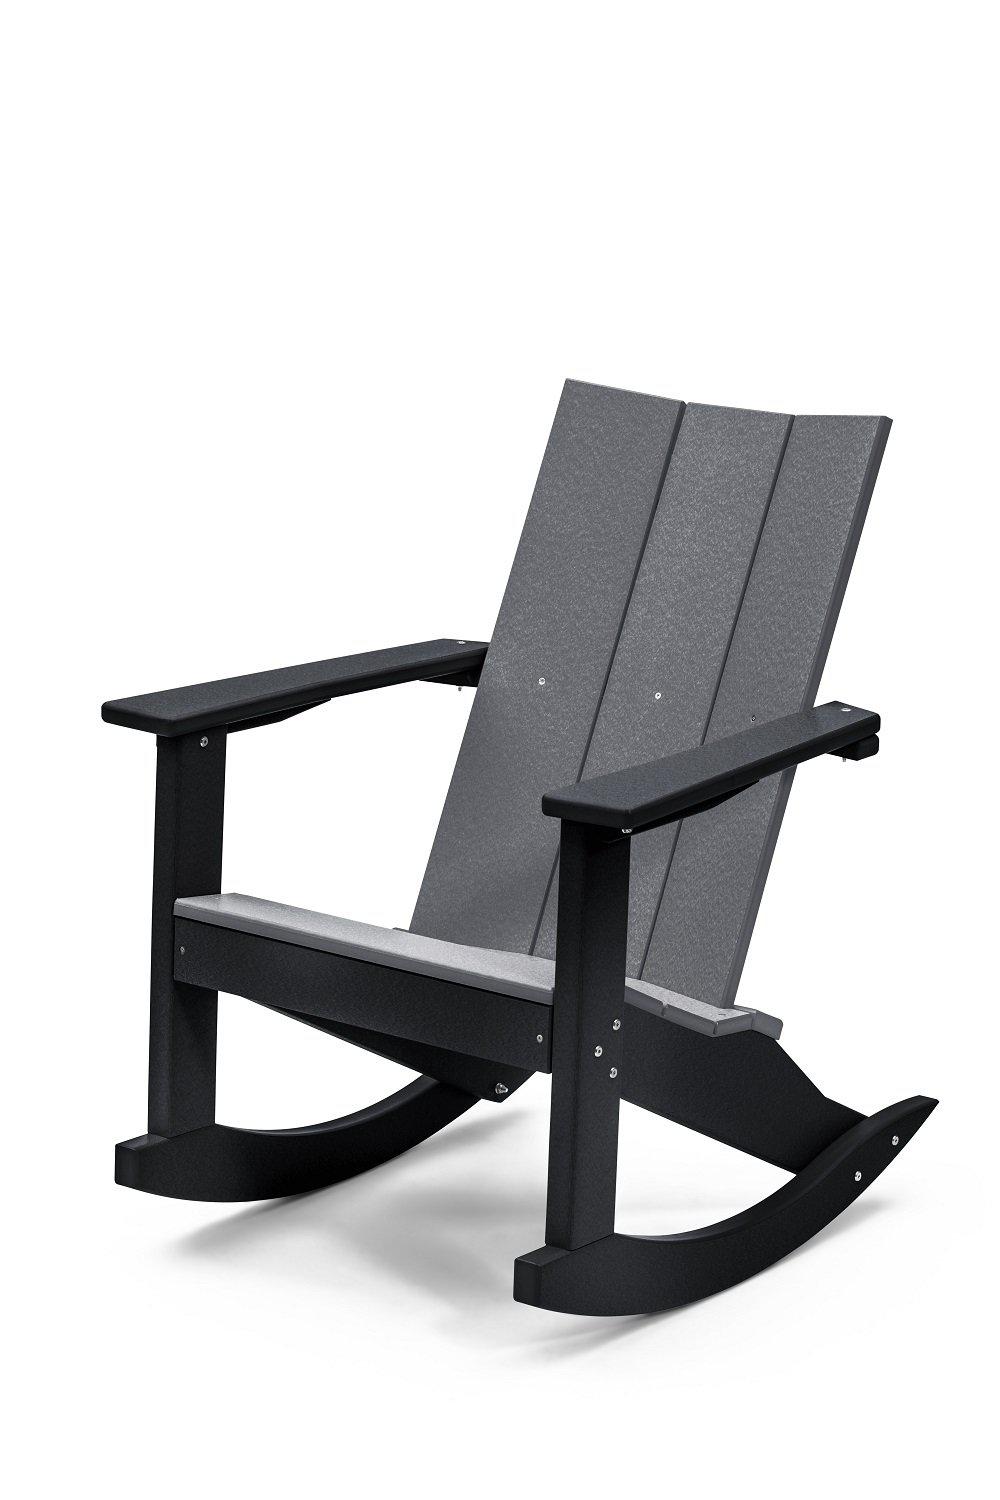 Perfect Choice Furniture Recycled Plastic Stanton Adirondack Rocking Chair - LEAD TIME TO SHIP 4 WEEKS OR LESS